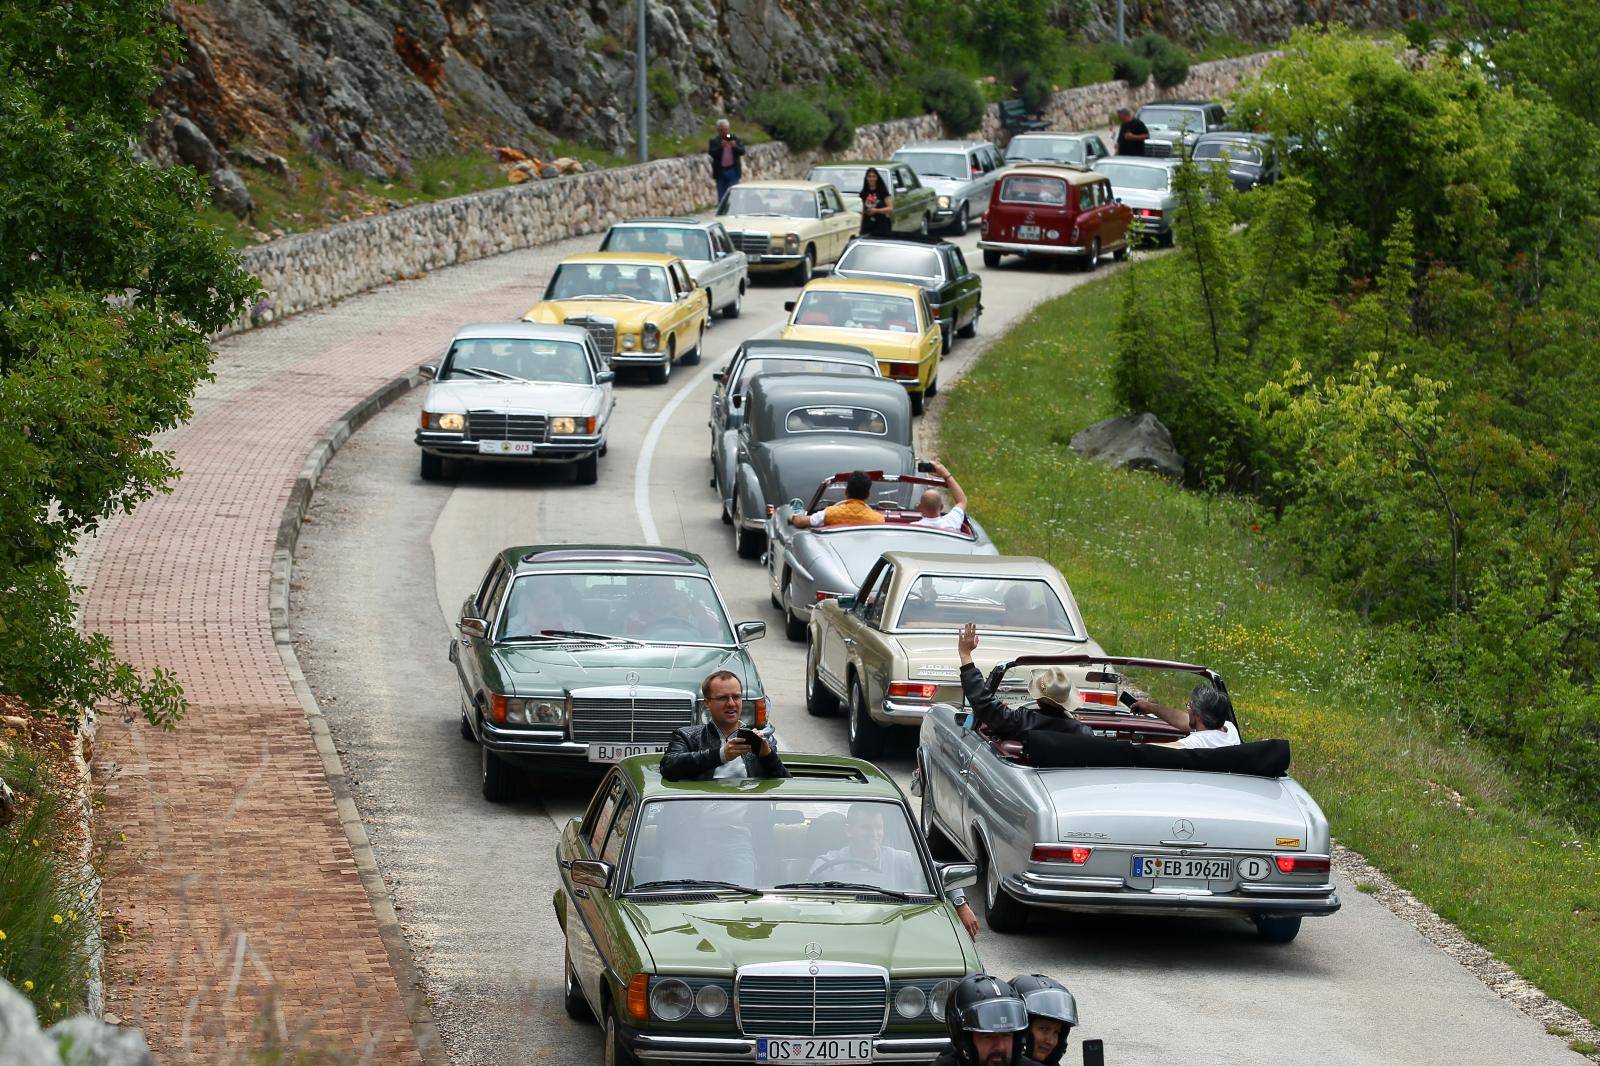 Old-timer Mercedes cars are seen driving in Imotski